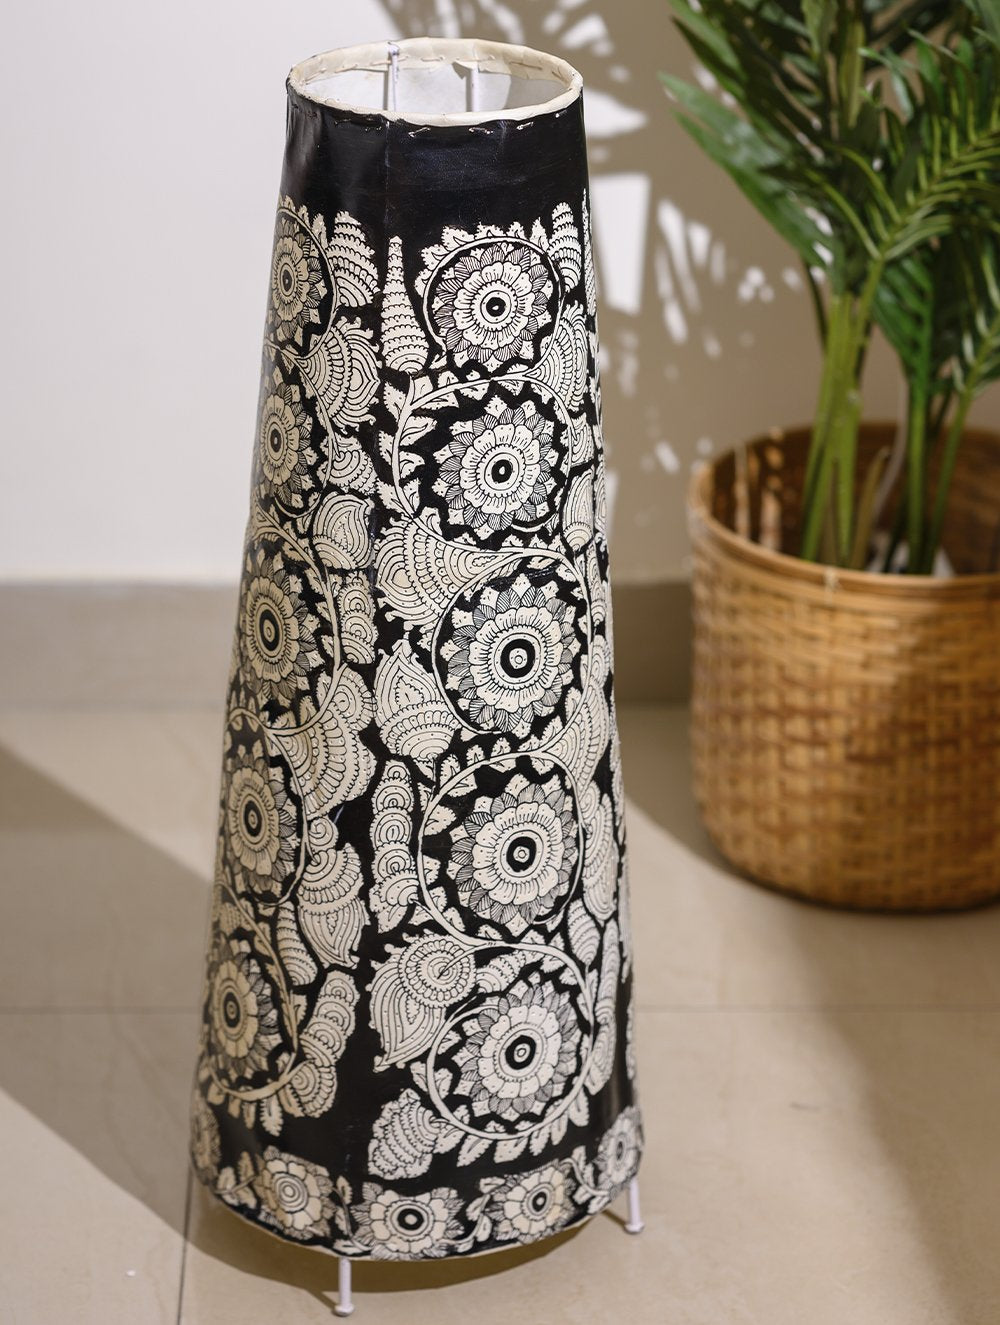 Load image into Gallery viewer, Andhra Leather Craft - Floor Lamp Shade (Large) - Floral Charm